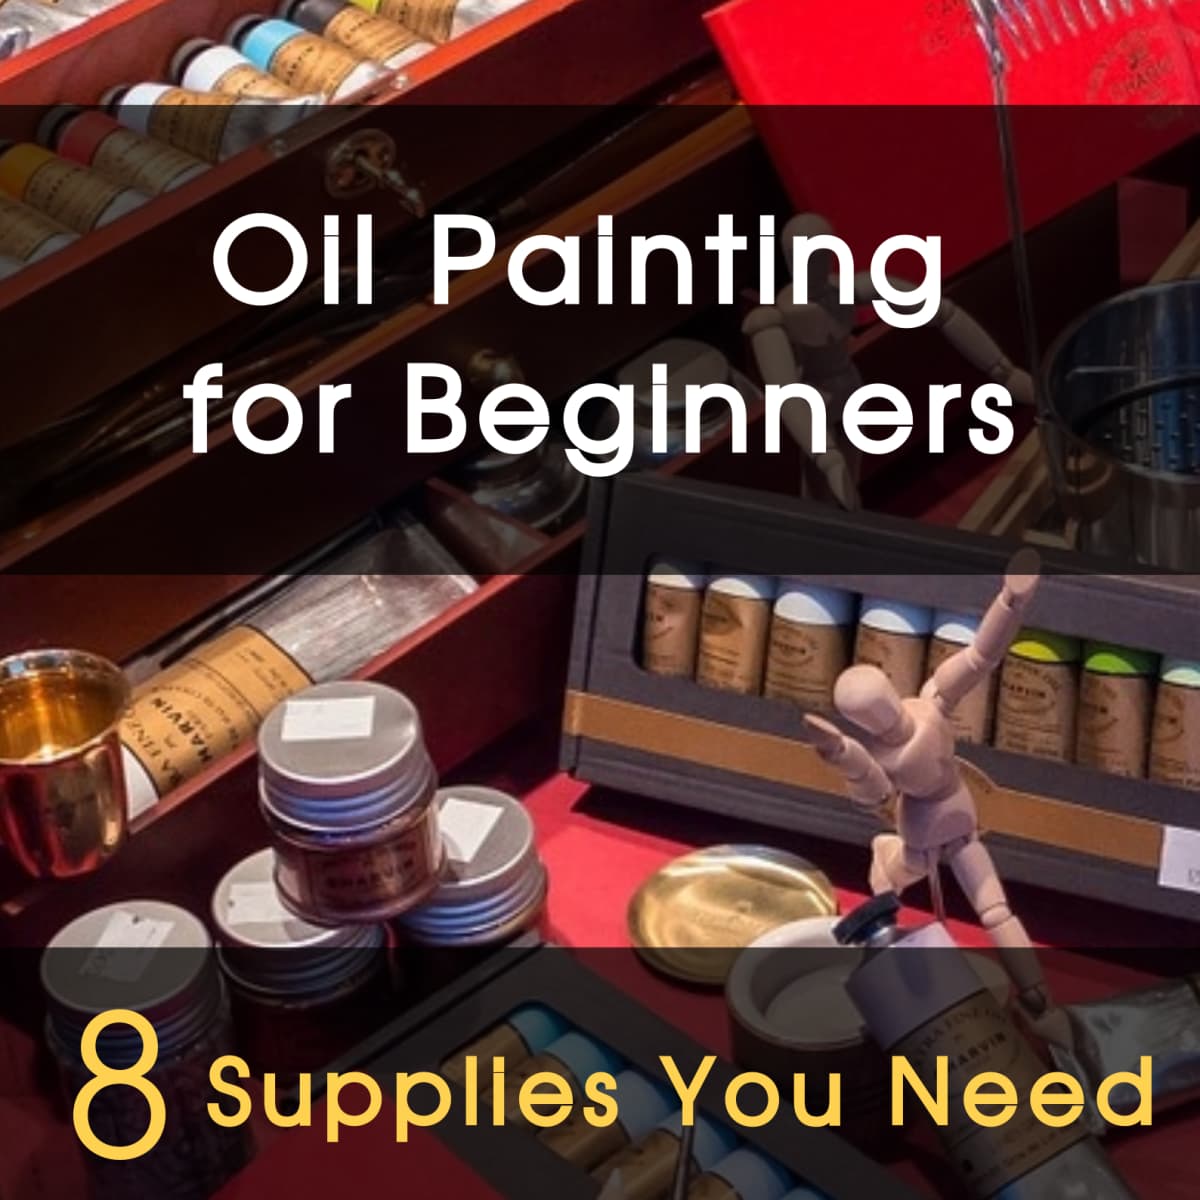 Essential Artist Oil Painting Supplies List For Beginners: Top 13 Products